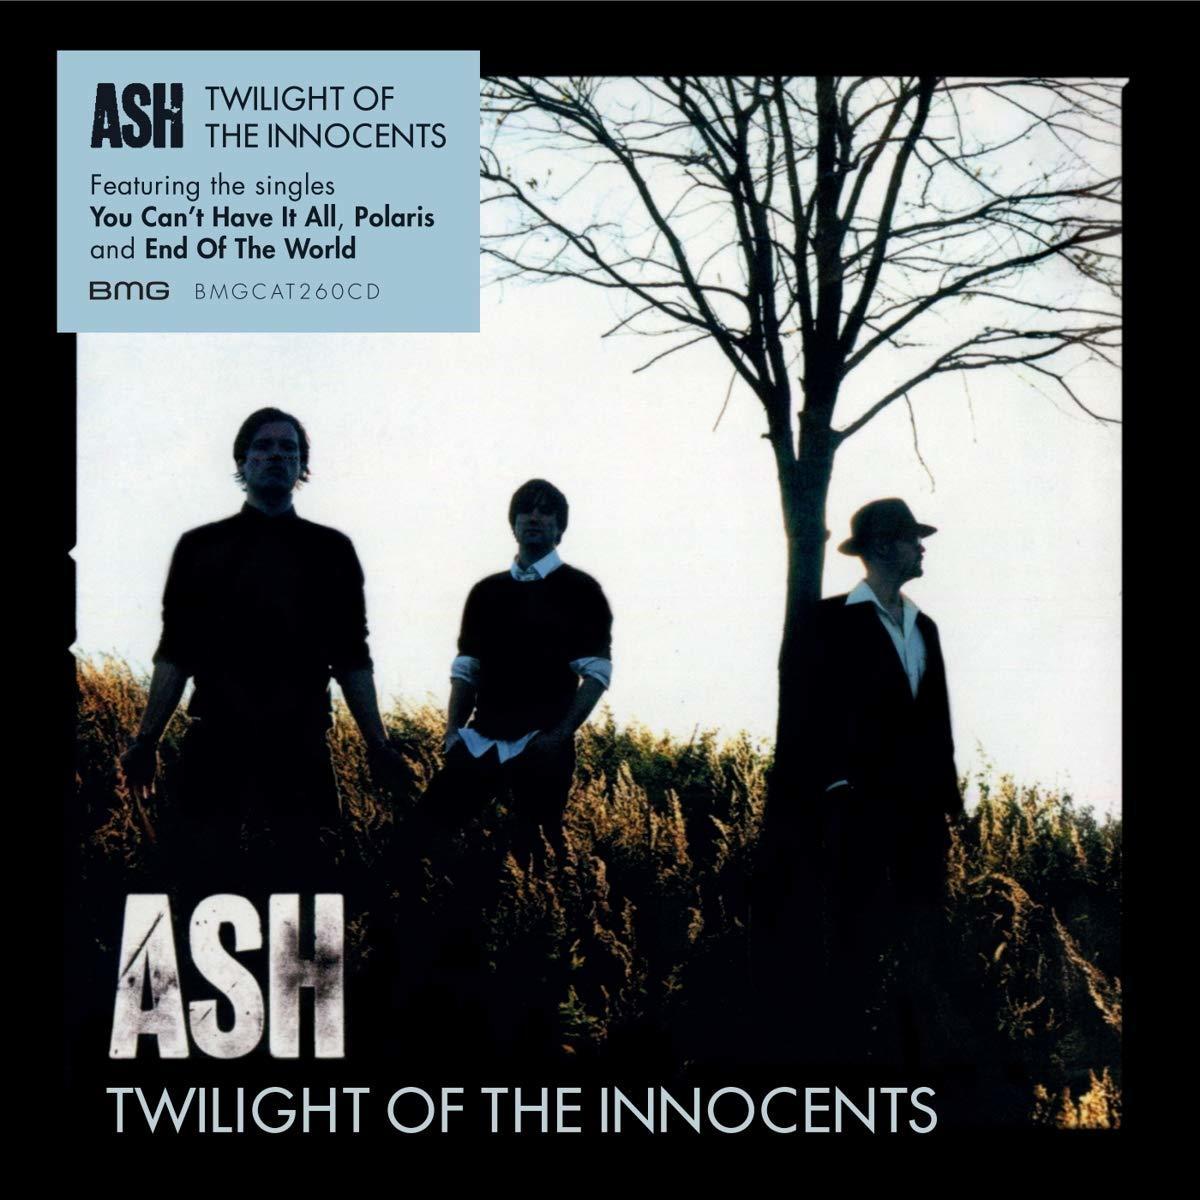 Ash - Twilight of the (2018 Reissue) - (CD) Innocents